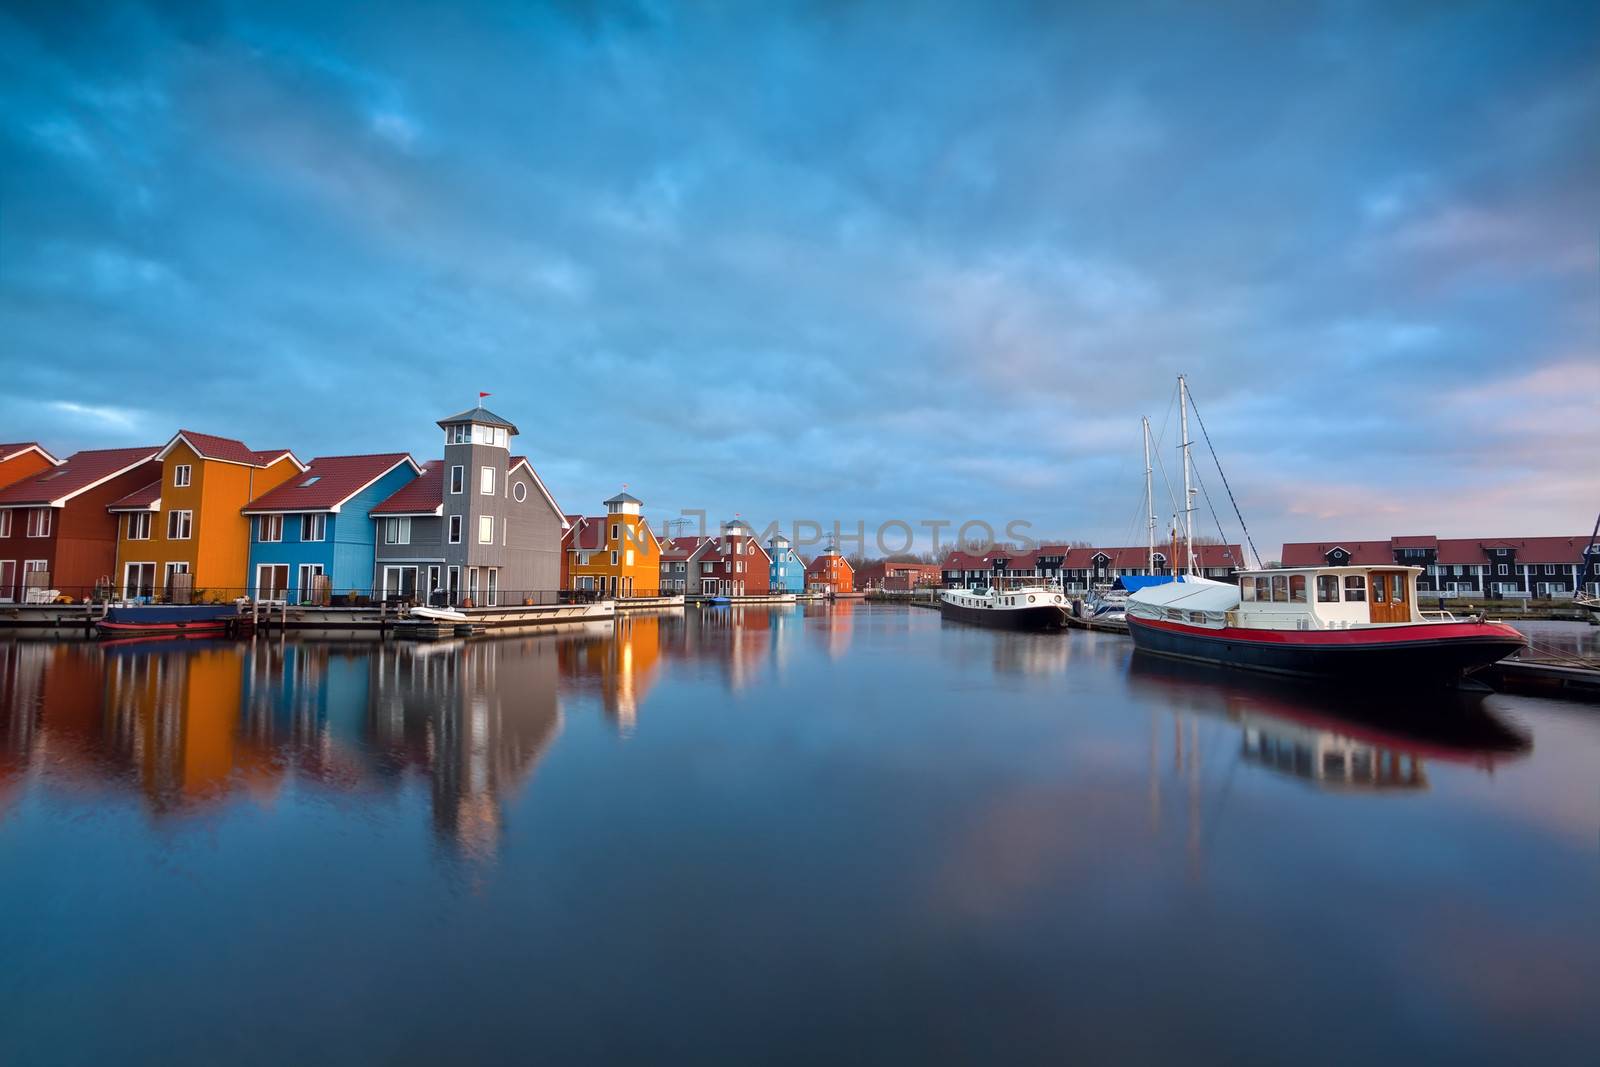 sunrise over colorful buildings and boats at Reitdiephaven, Groningen, Netherlands